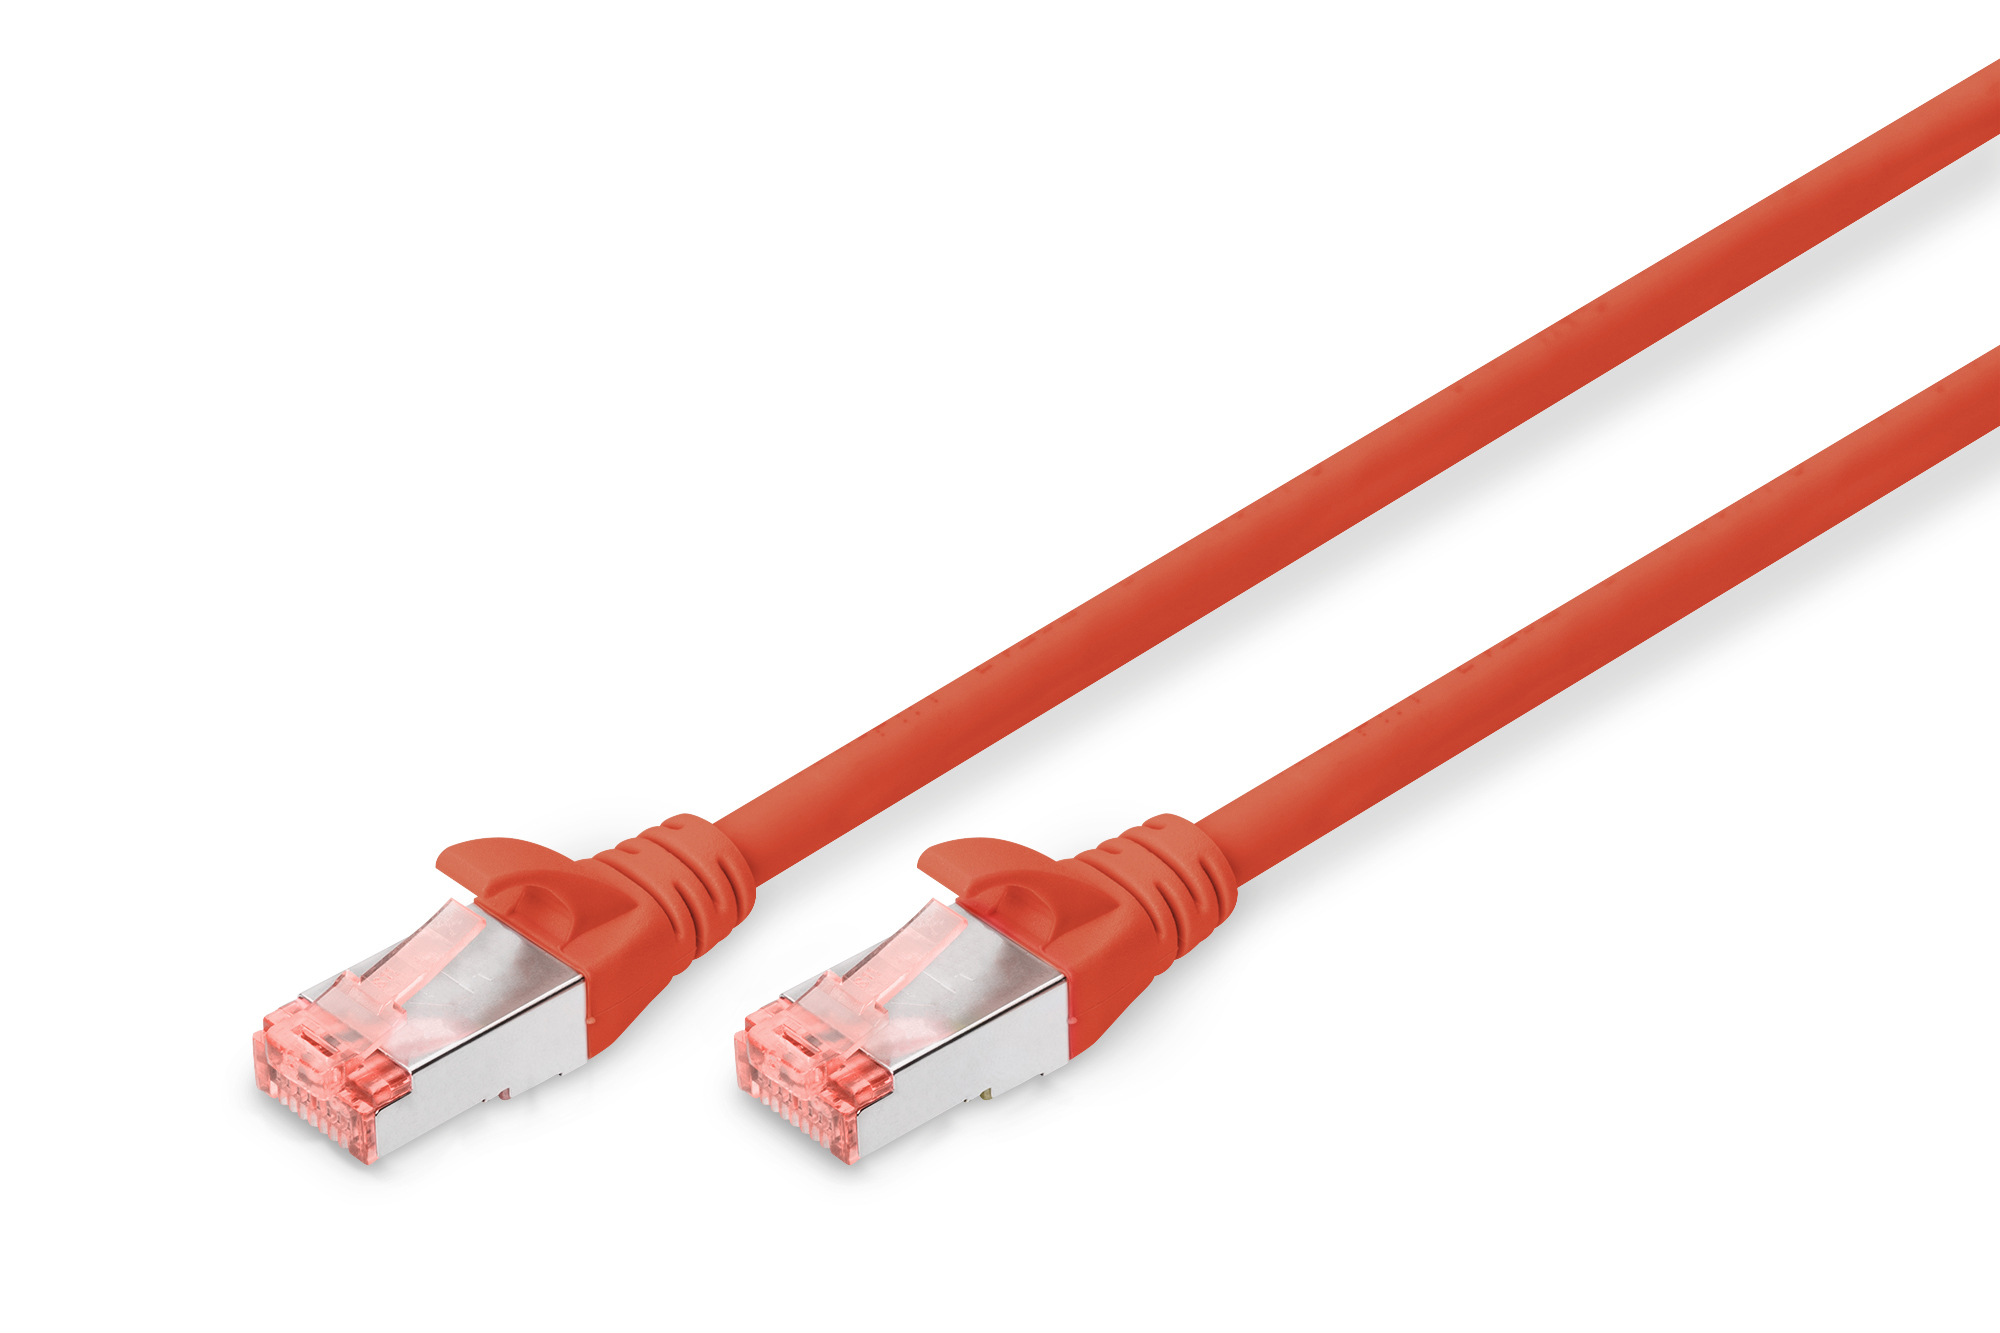 DIGITUS Patchkabel CAT 6 S-FTP, Länge 0,25 m, Farbe Rot